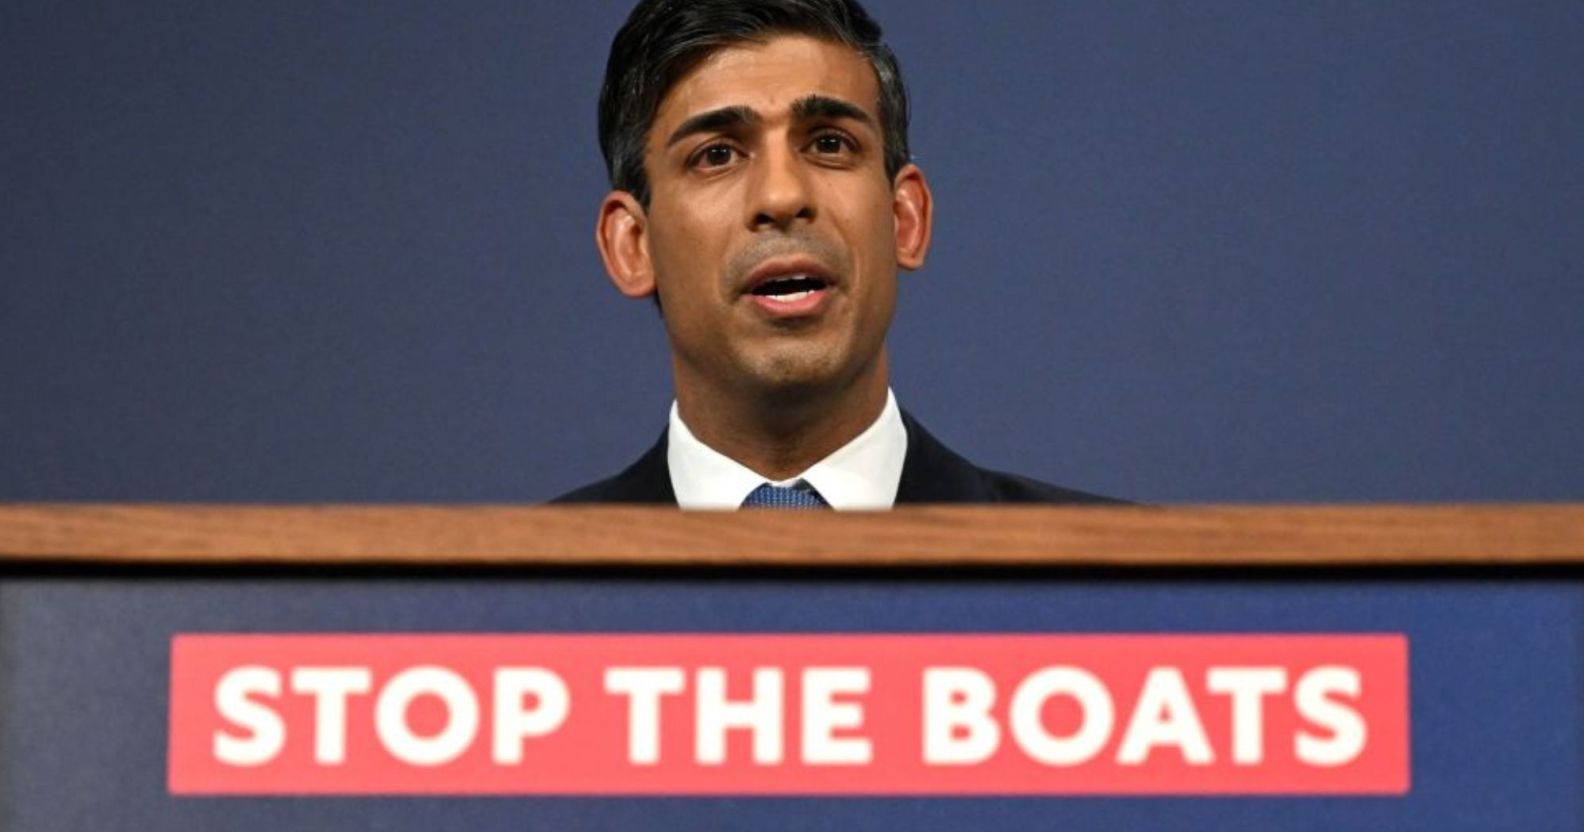 Rishi Sunak announcing the Illegal Migration Bill at a podium with the message "stop the boats".